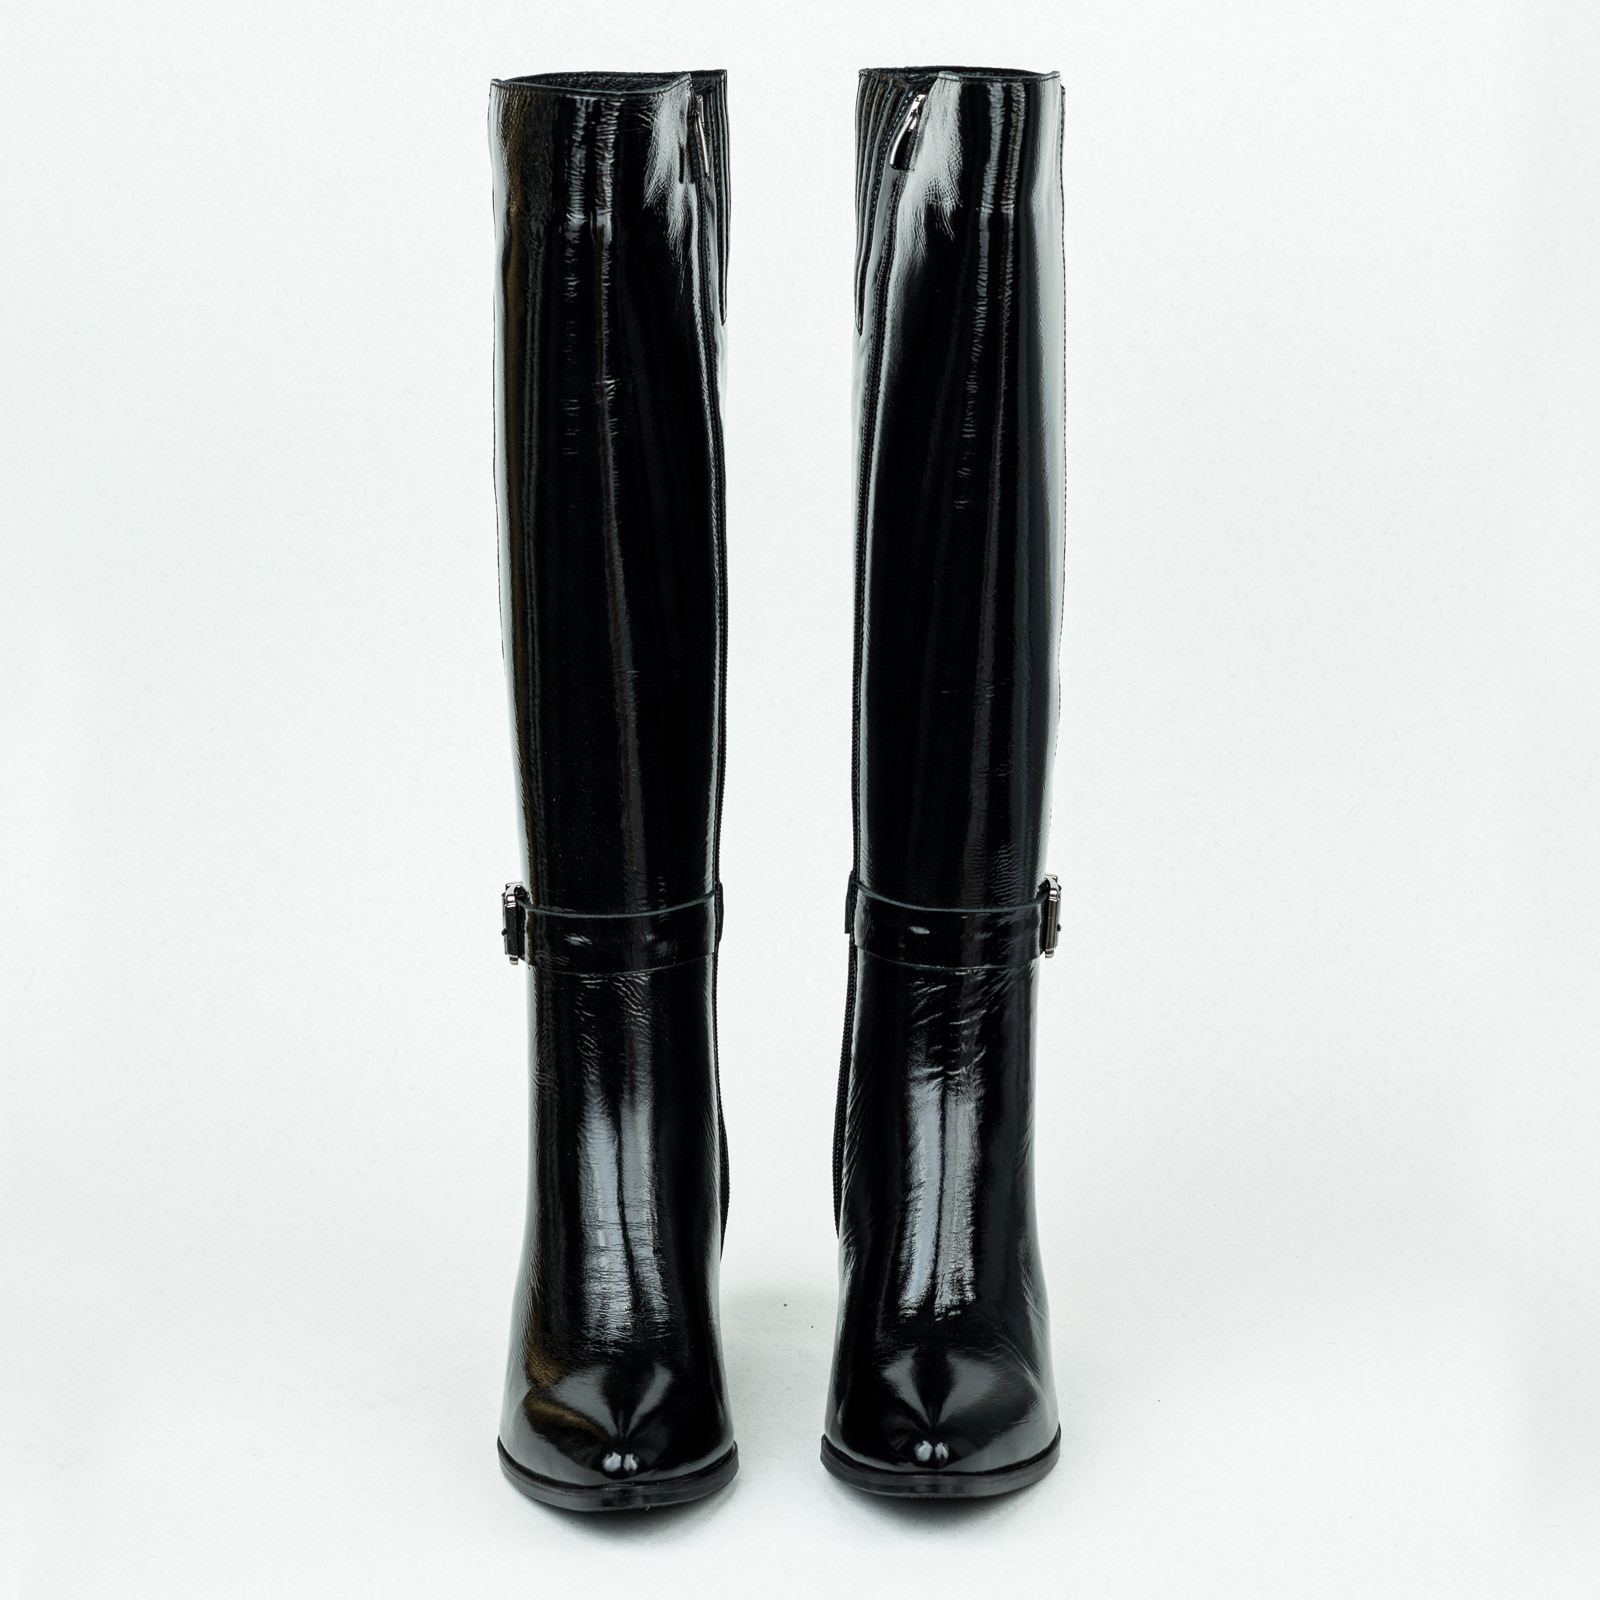 Leather boots B097 - BLACK